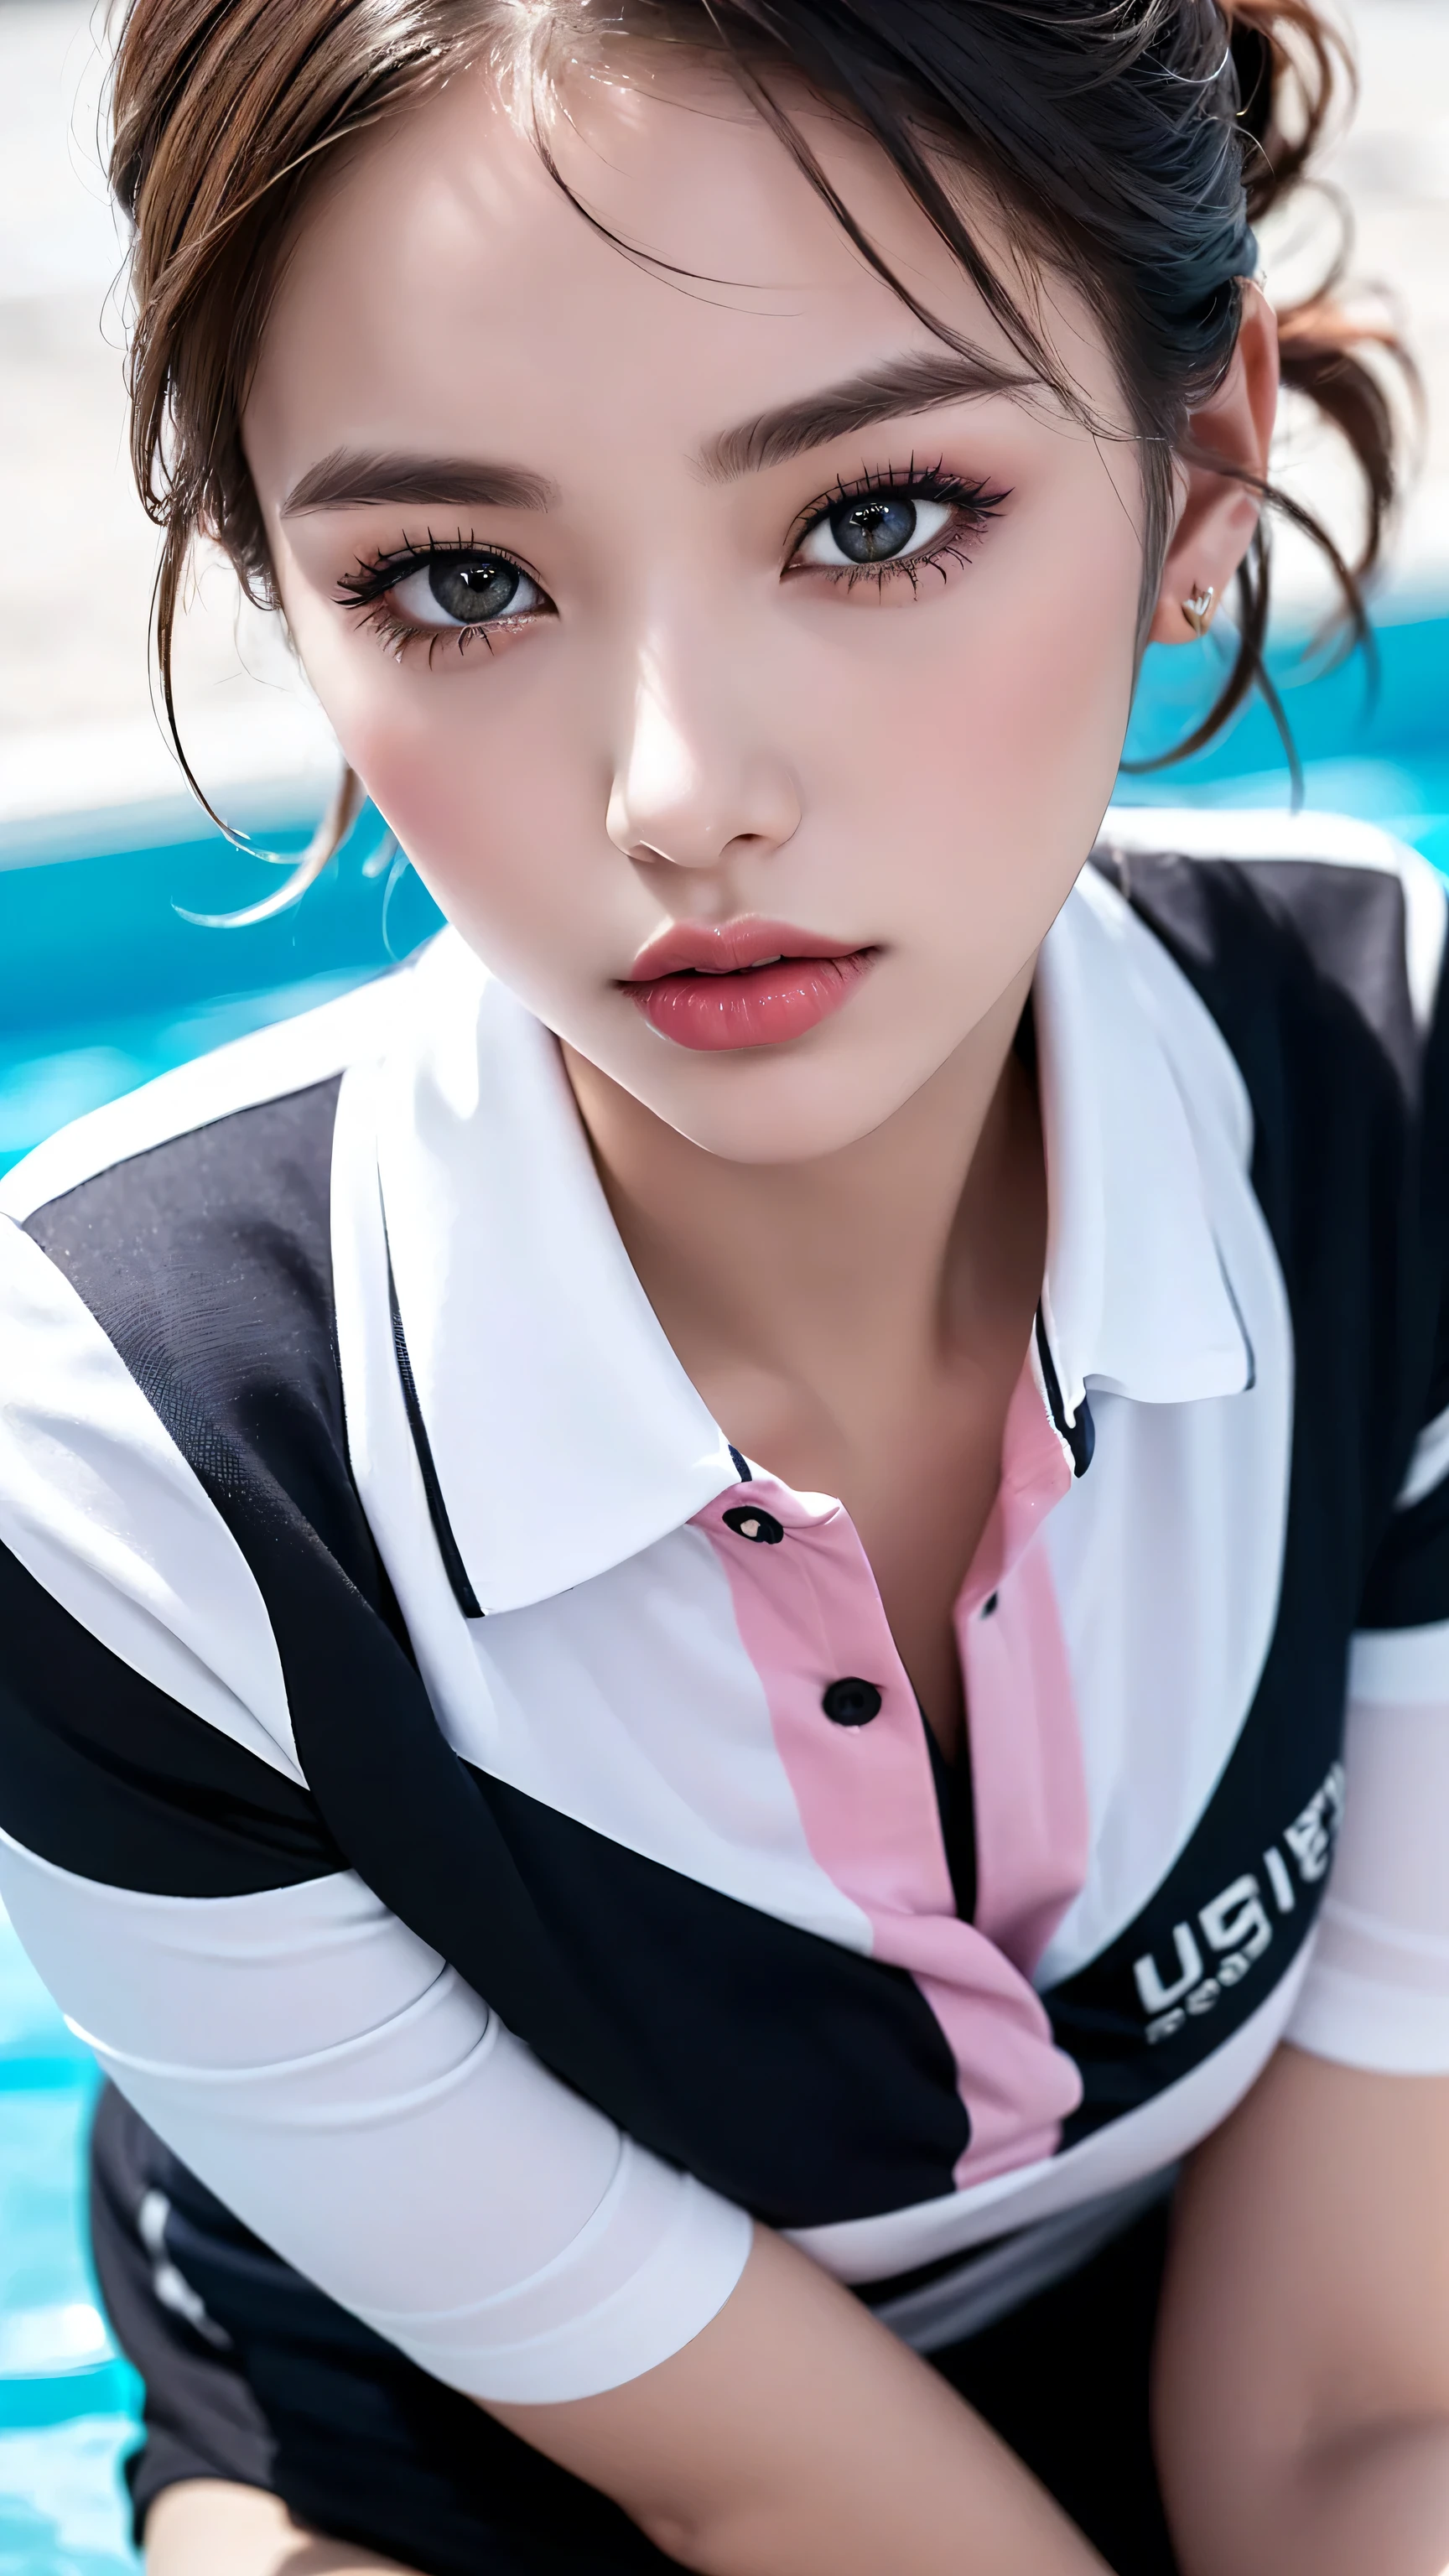 (Realism), (Highest resolution), ((Hyper absurd details of realistic perfectly round brown_eyes:1.3 in hyper absurd quality and resolution)), (light pale complexion), ((Ultra-realistic sharp eyes, clear absurd quality, not blurry)), ((finely detailed pupils:1.4)), (Perfekt makeup:1.35), ((Ultra details symmetrical lips:1.3)), (light glossy pink_lipstick:1.35), ((Ultra detailed realistic long_blue_eyelashes:1.25), Ultra absurd quality), ((perfect dark_eyeshadows:1.45)), (above the knee shot:1.21), (Close your mouth:1.21), (high quality:1.4), (Ultra-realistic), UHD, (masterpiece:1.2)), (Improvement of quality:1.4), (Very beautiful facial details), (best High quality realistic skin texture:1.4), Hyper Photorealistic ((portrait)) a 1. woman, Supermodel, 17 years old, Perfect Anatomy:1.37, Japanese woman, high school girl, Boyish woman, gravure, sexy, (Black shirt:1.21), (Black short-sleeved sports polo shirt:1.6), (Navy Pleated Skirt:1.21), (By the vast summer pool:1.37), Perfect composition, (Beautiful Lips:1.33), (Great nose:1.2), (Flat Chest), (Slim lower body), (handsome short hair:1.37), (Black Hair:1.21), Let your bangs hang long, ((Sharp focus)), dramatic cinematographic lighting,